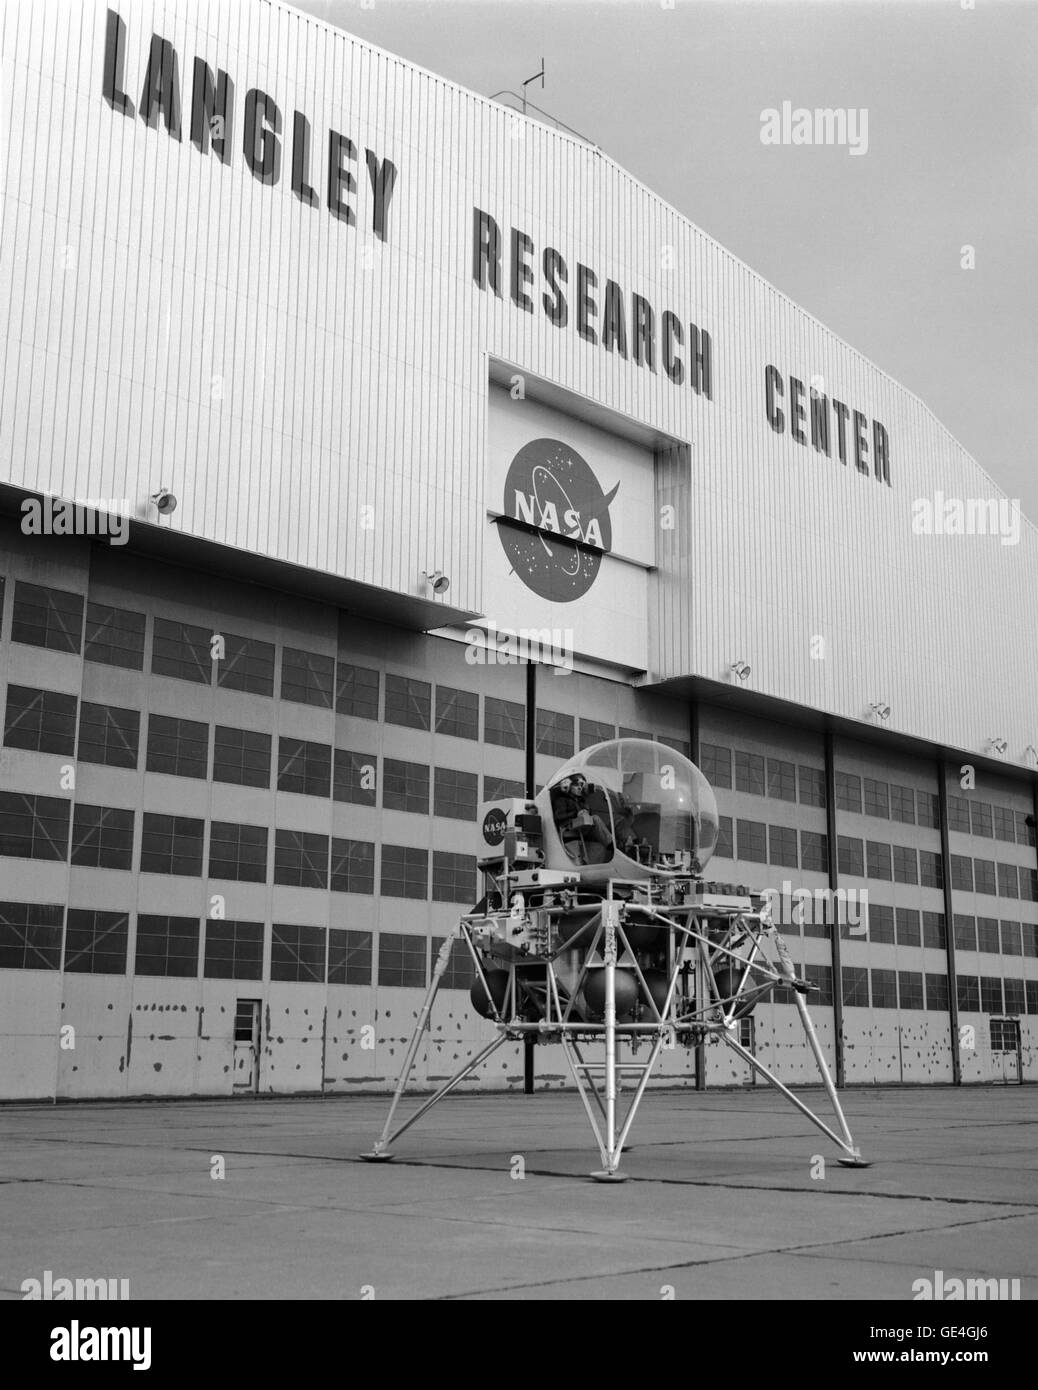 (December 2, 1963) Lunar Landing Research Vehicle outside NASA Langley hangar. The LLRV was later shipped to Houston to train astronauts for landing the Lunar Module.   Image # : L-1963-09785 Stock Photo